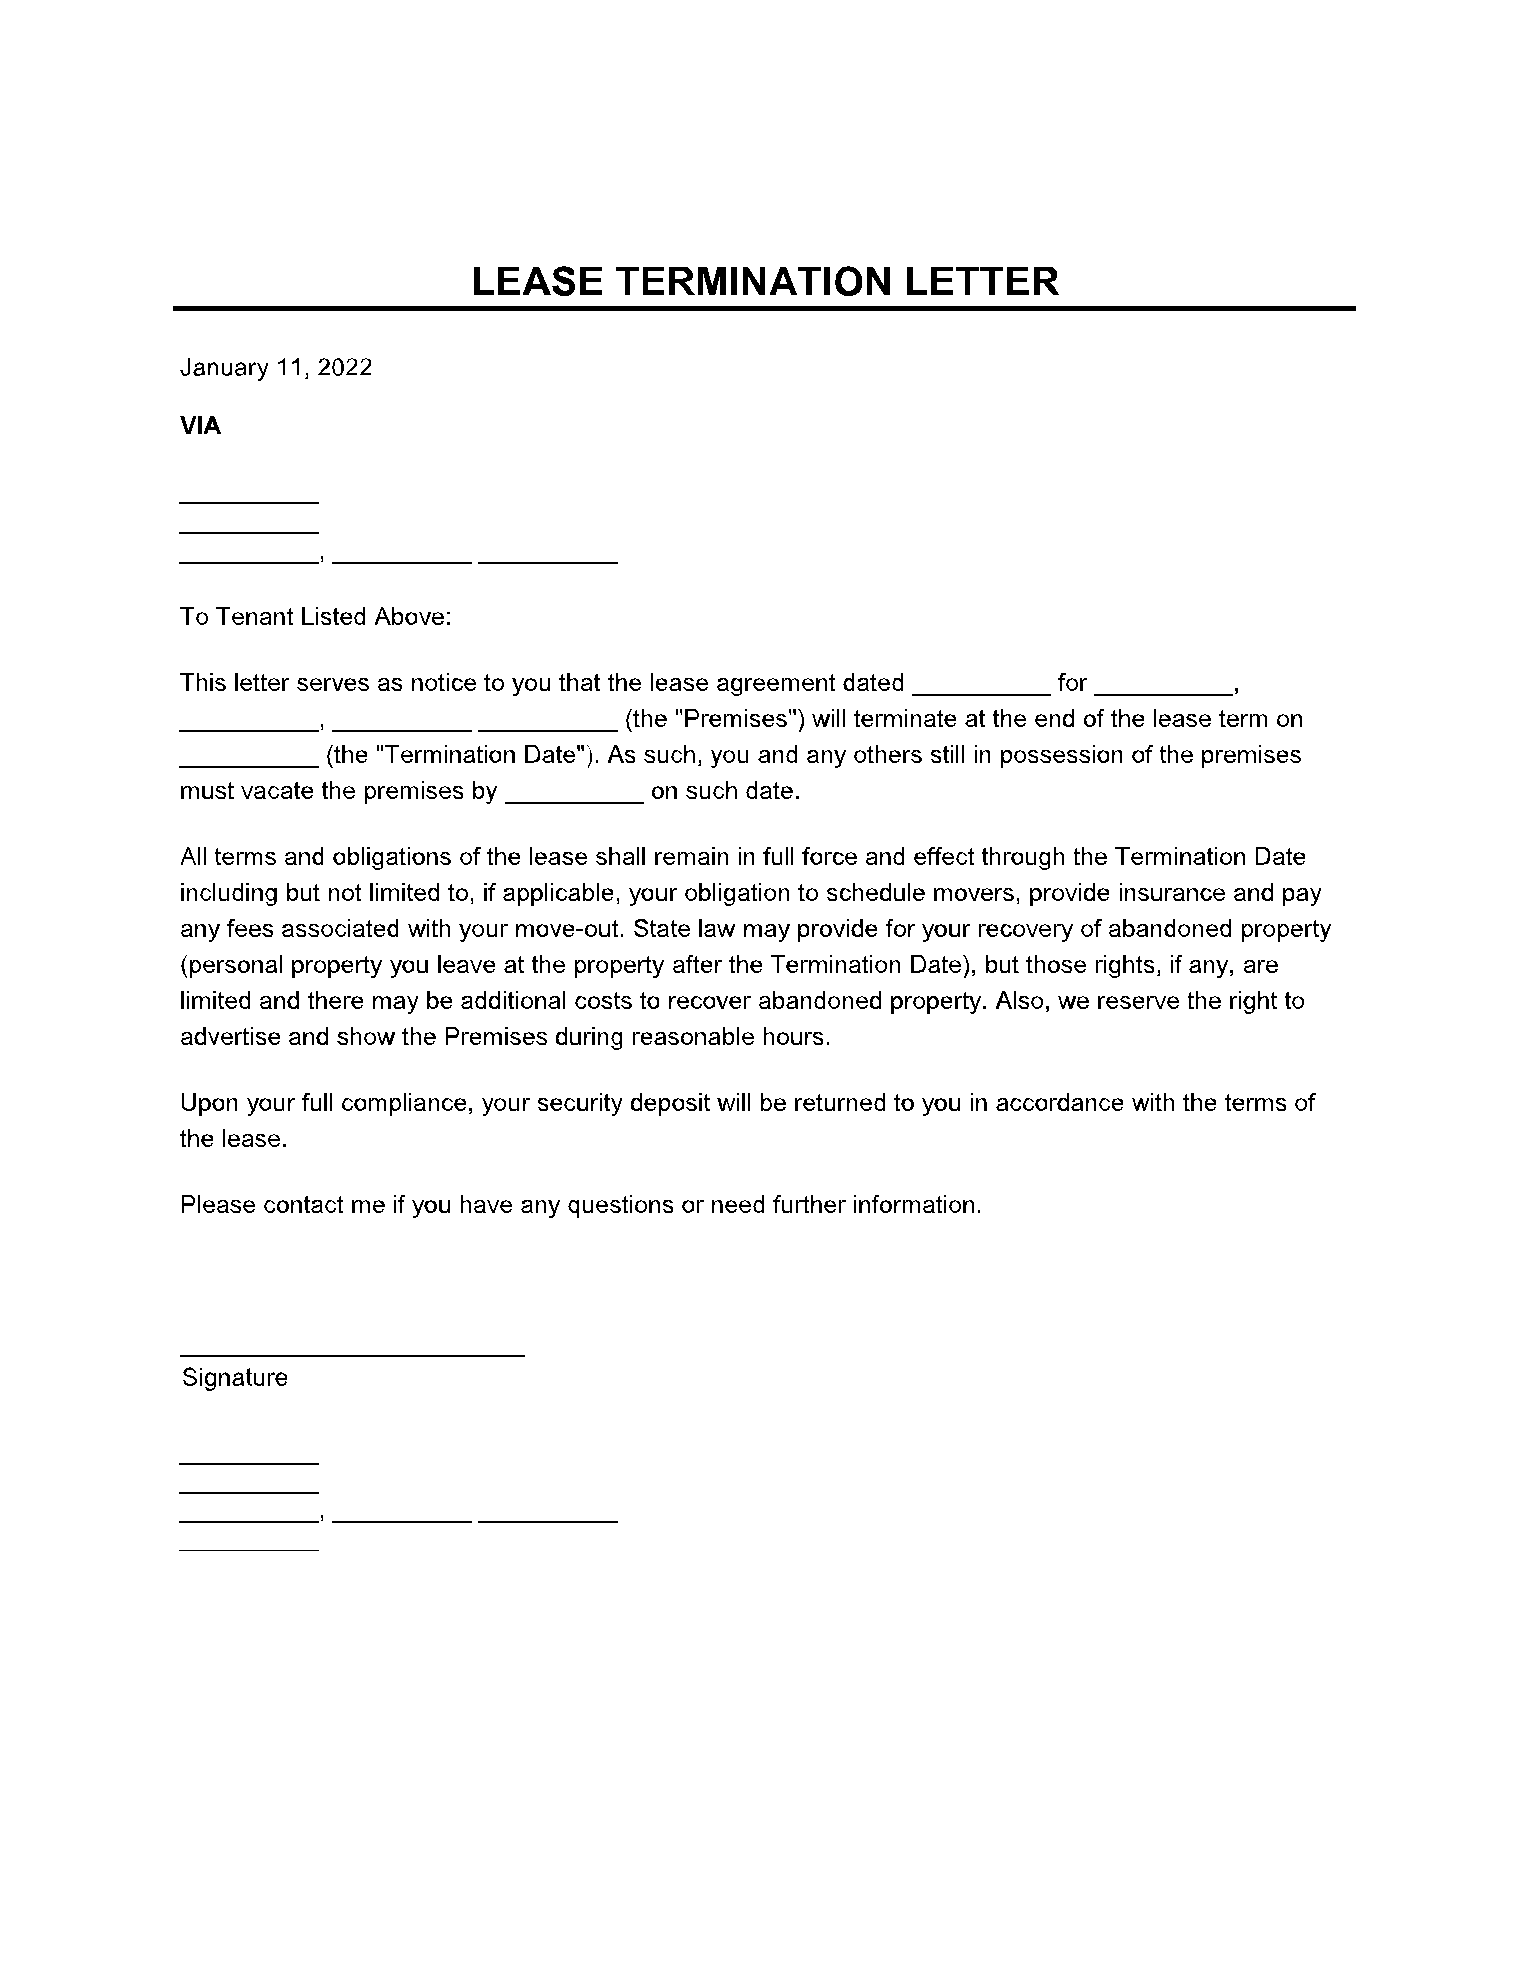 Lease Termination Letter 1